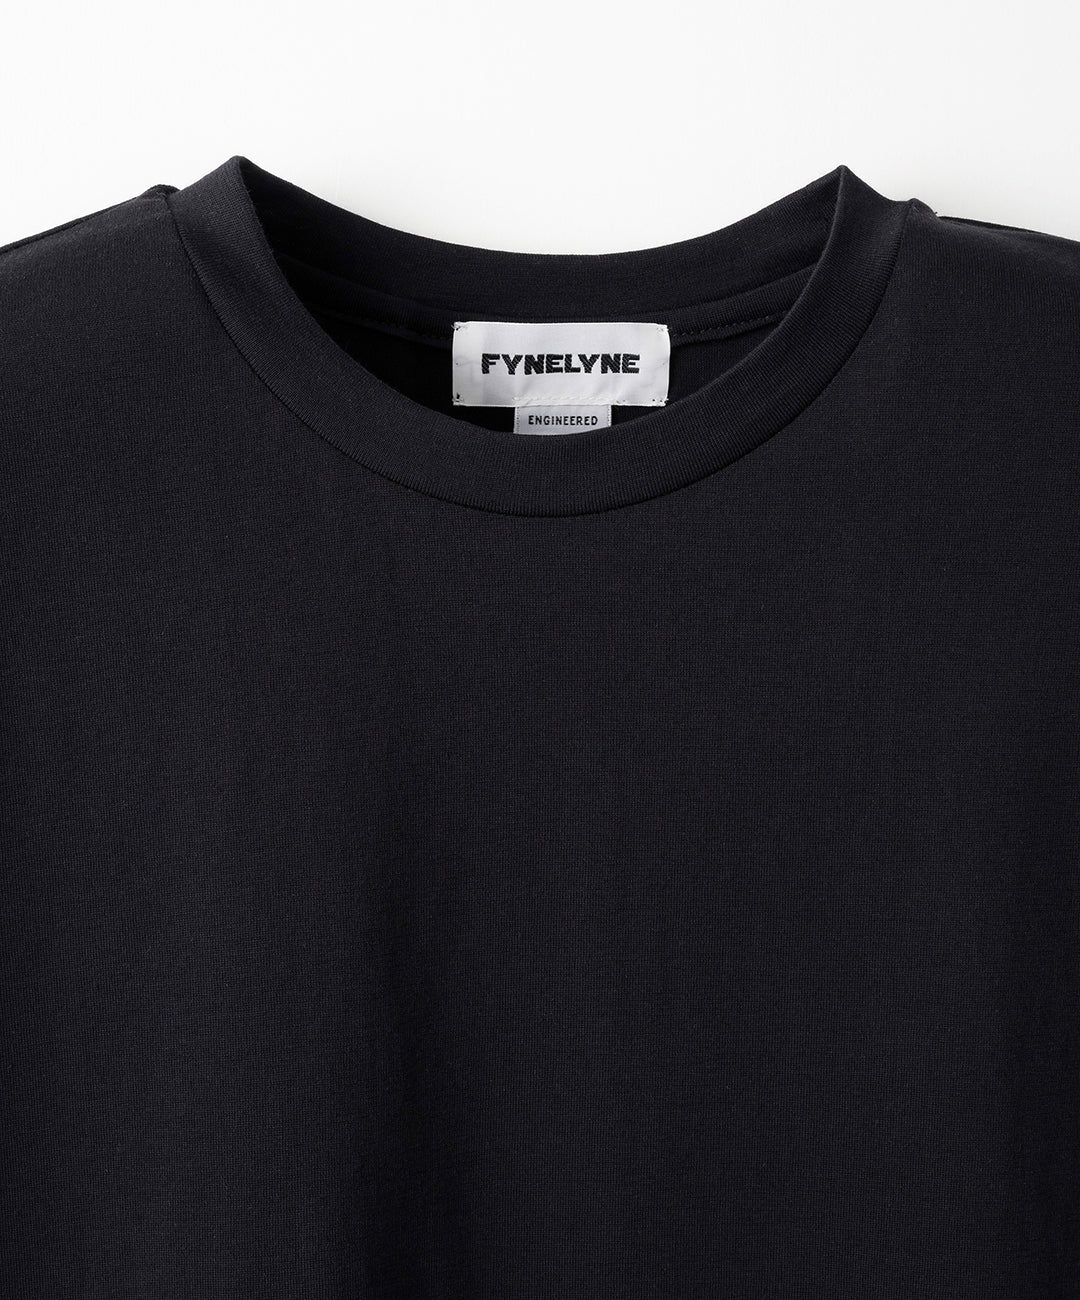 FYNELYNE engineered by LIFiLL / COTTONY LONG SLEEVE CREW NECK